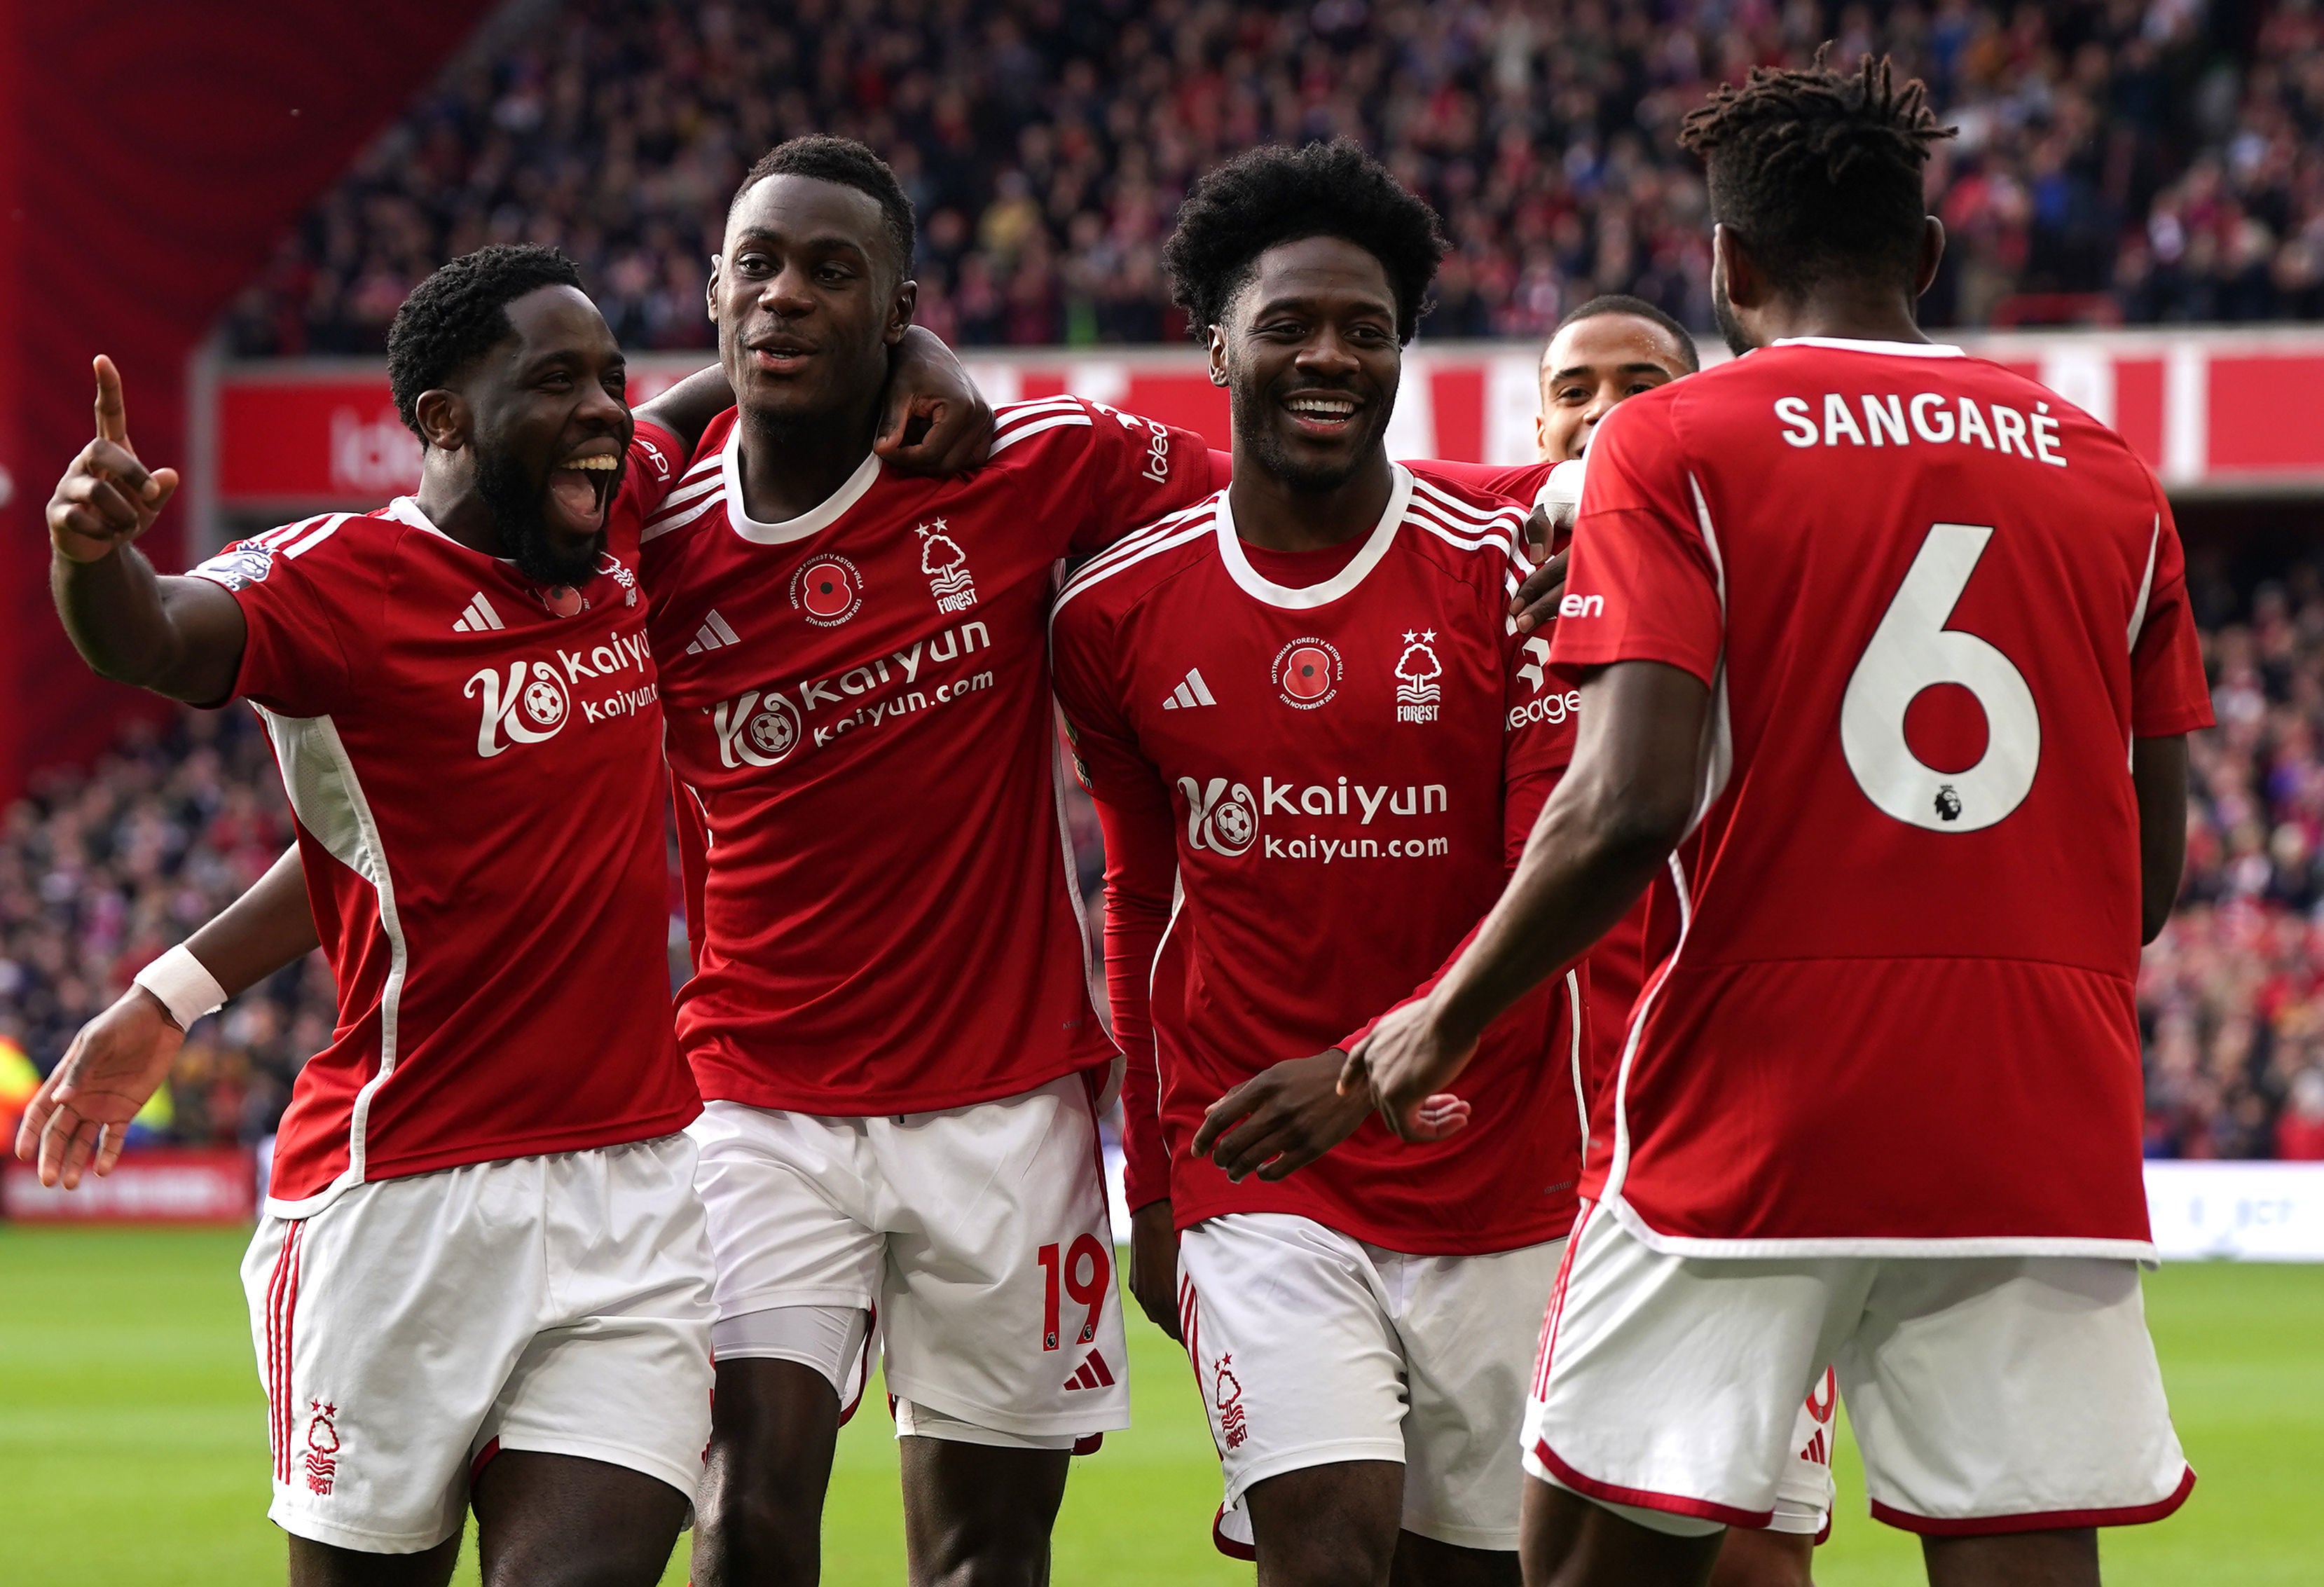 Nottingham Forest’s Ola Aina (centre) celebrates scoring the first goal of the game